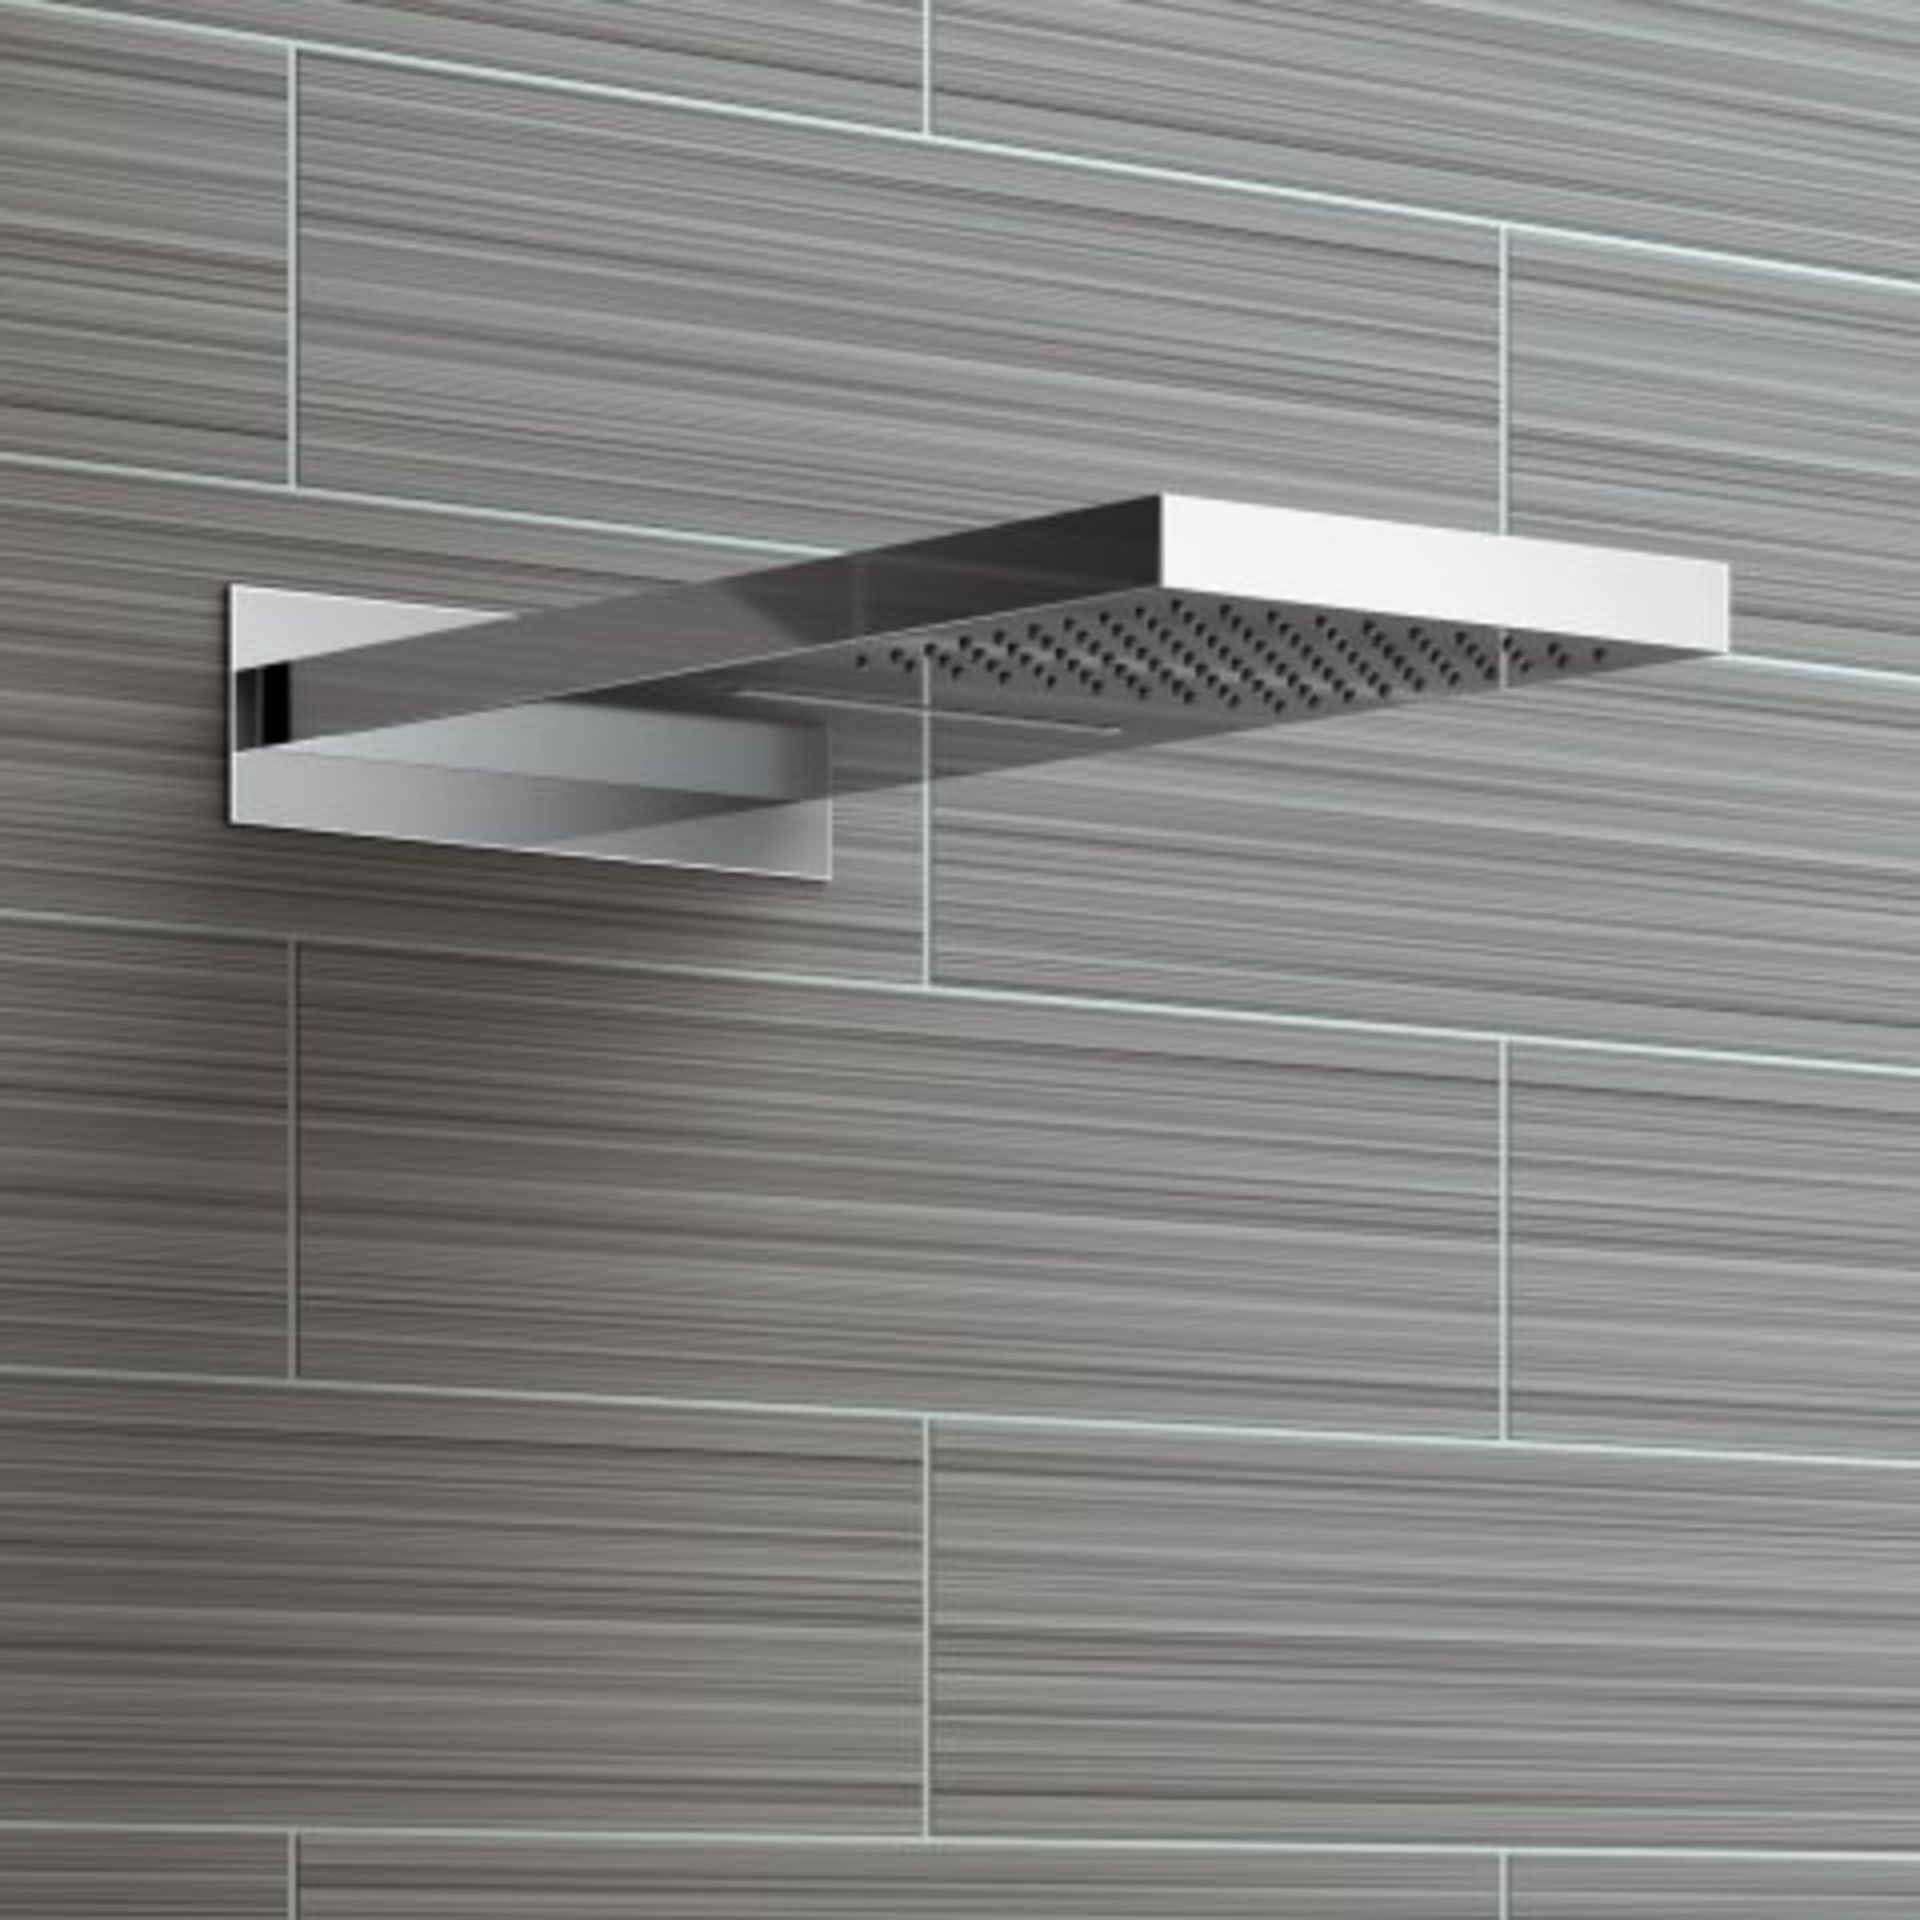 (J213) Stainless Steel 230x550mm Waterfall Shower Head. RRP £459.99. "What An Experience": Enjoy - Image 4 of 4